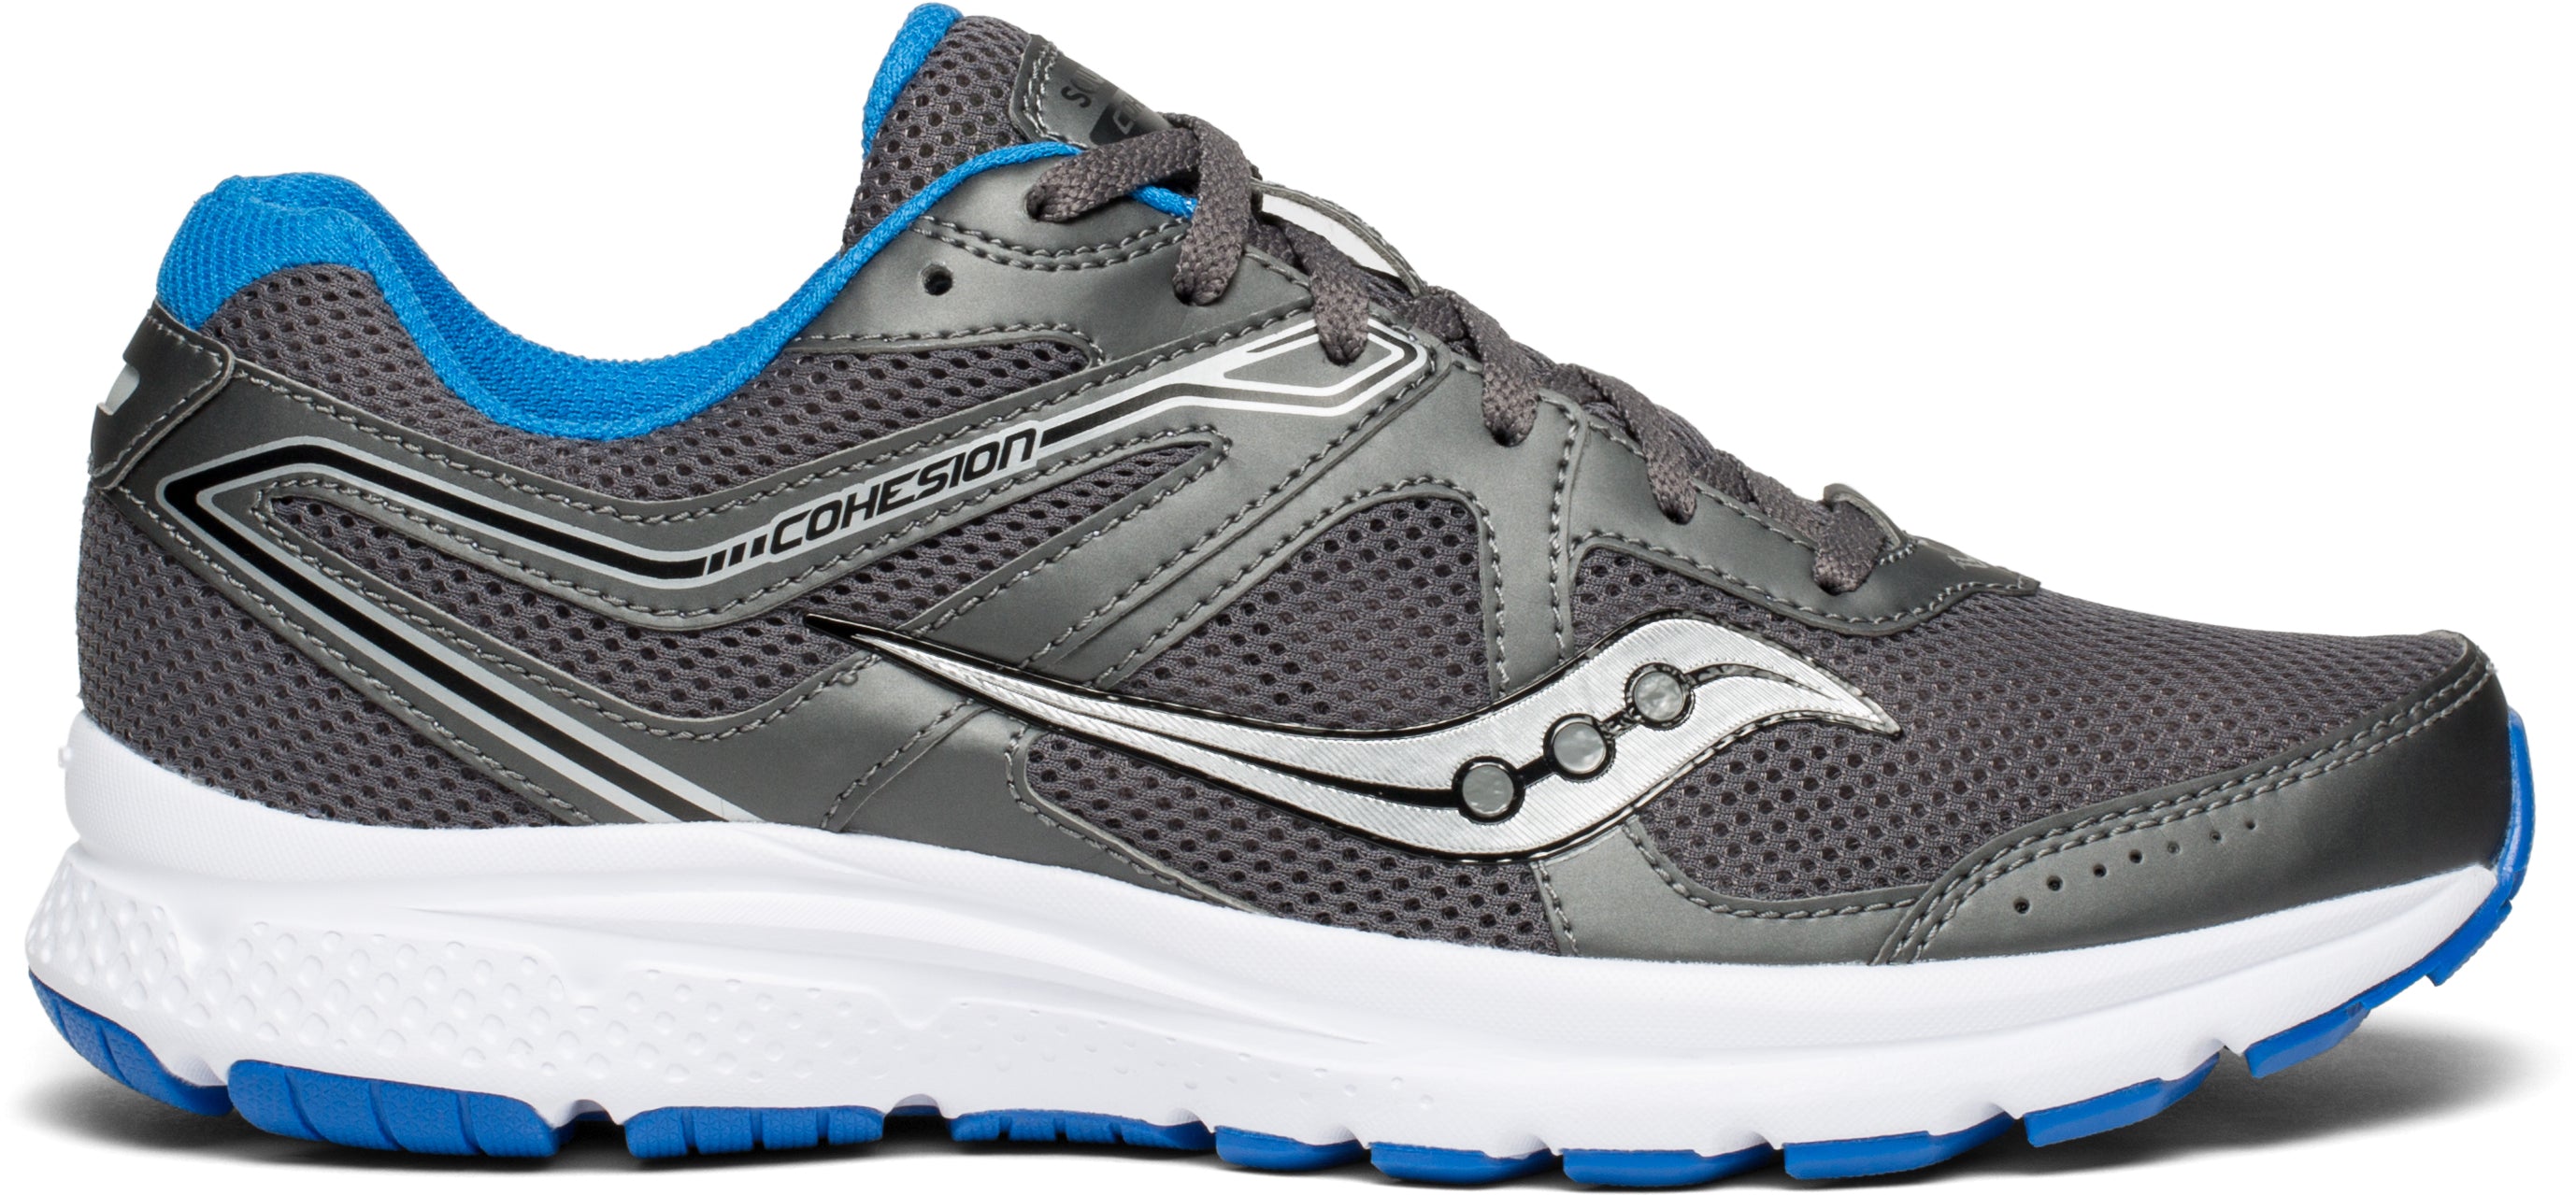 Saucony Cohesion 11 Running Shoes - Men's | The Last Hunt